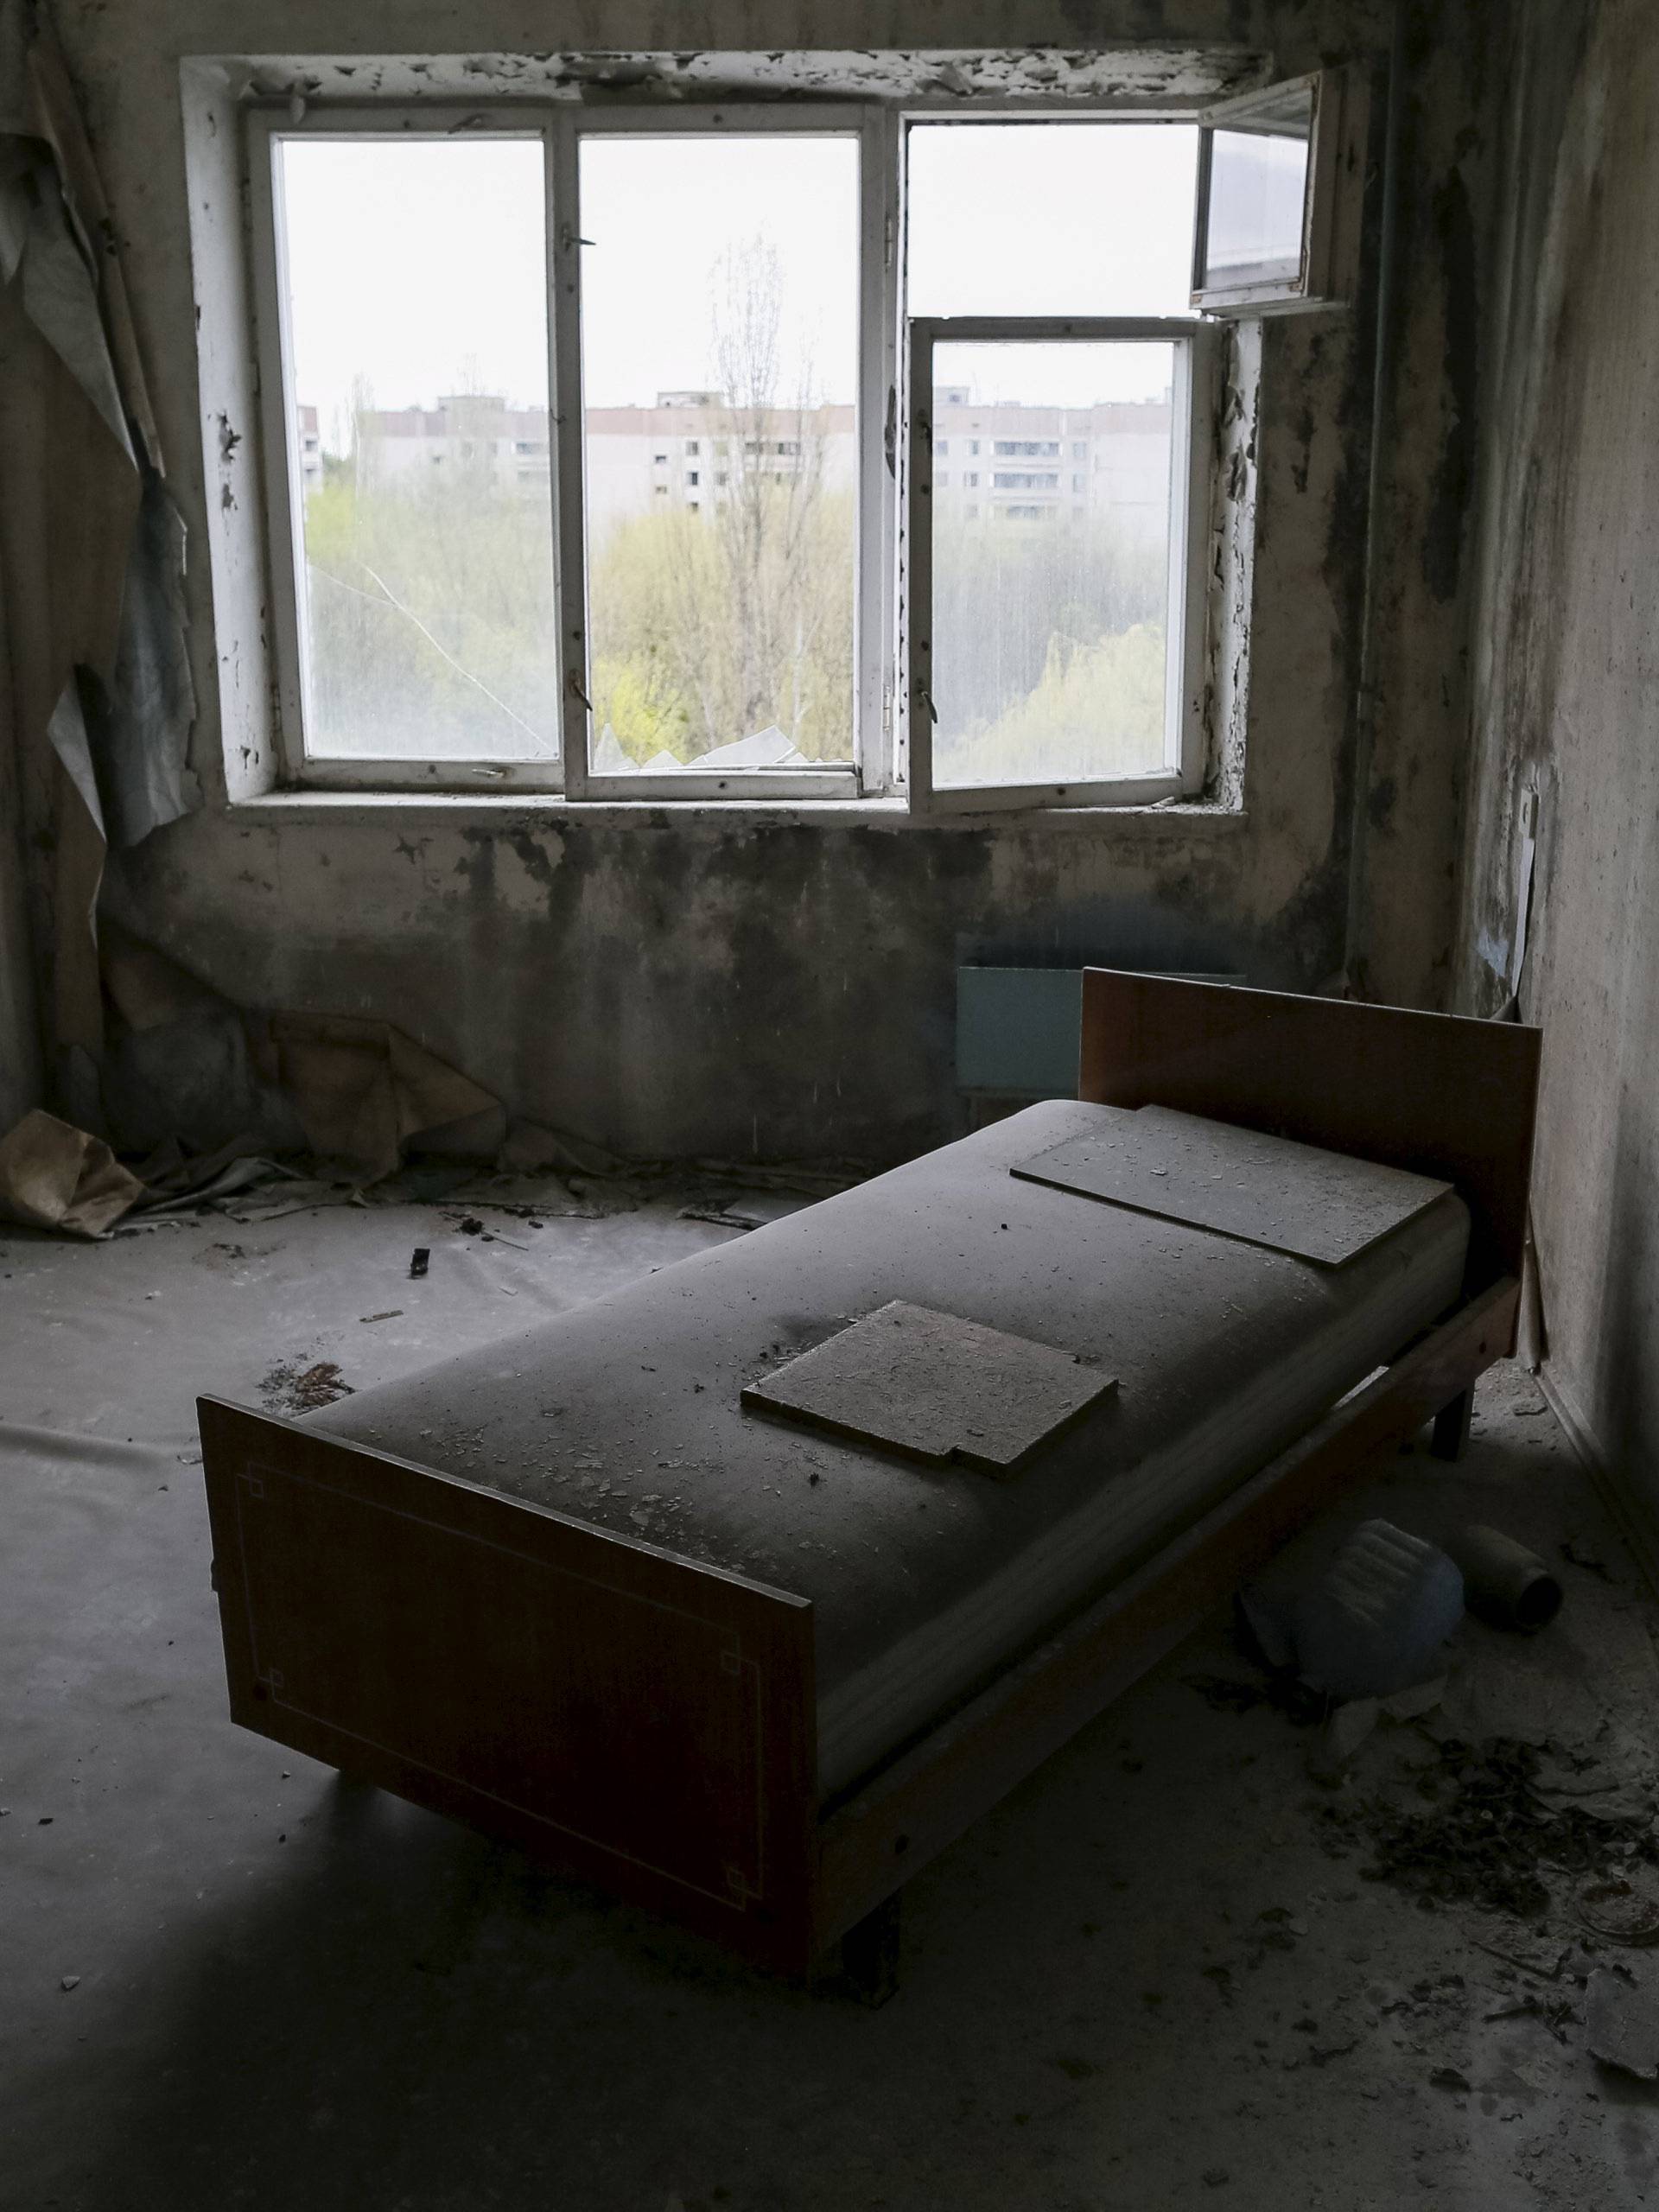 An interior view of a flat in the abandoned city of Pripyat near the Chernobyl nuclear power plant